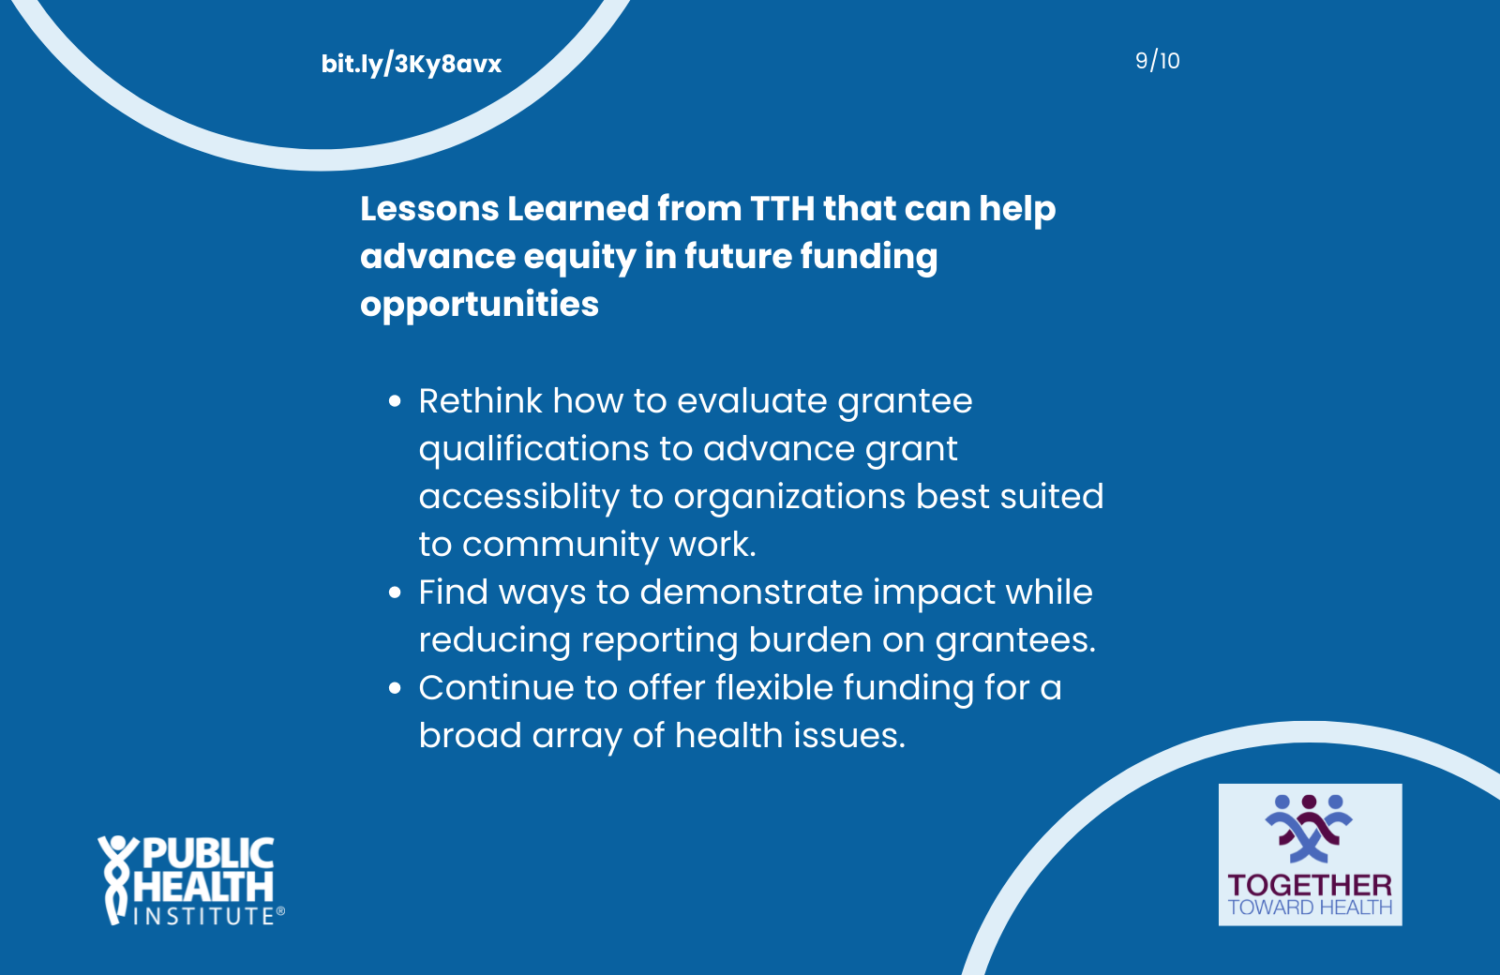 Lessons Learned from TTH that can help advance equity in future funding opportunities